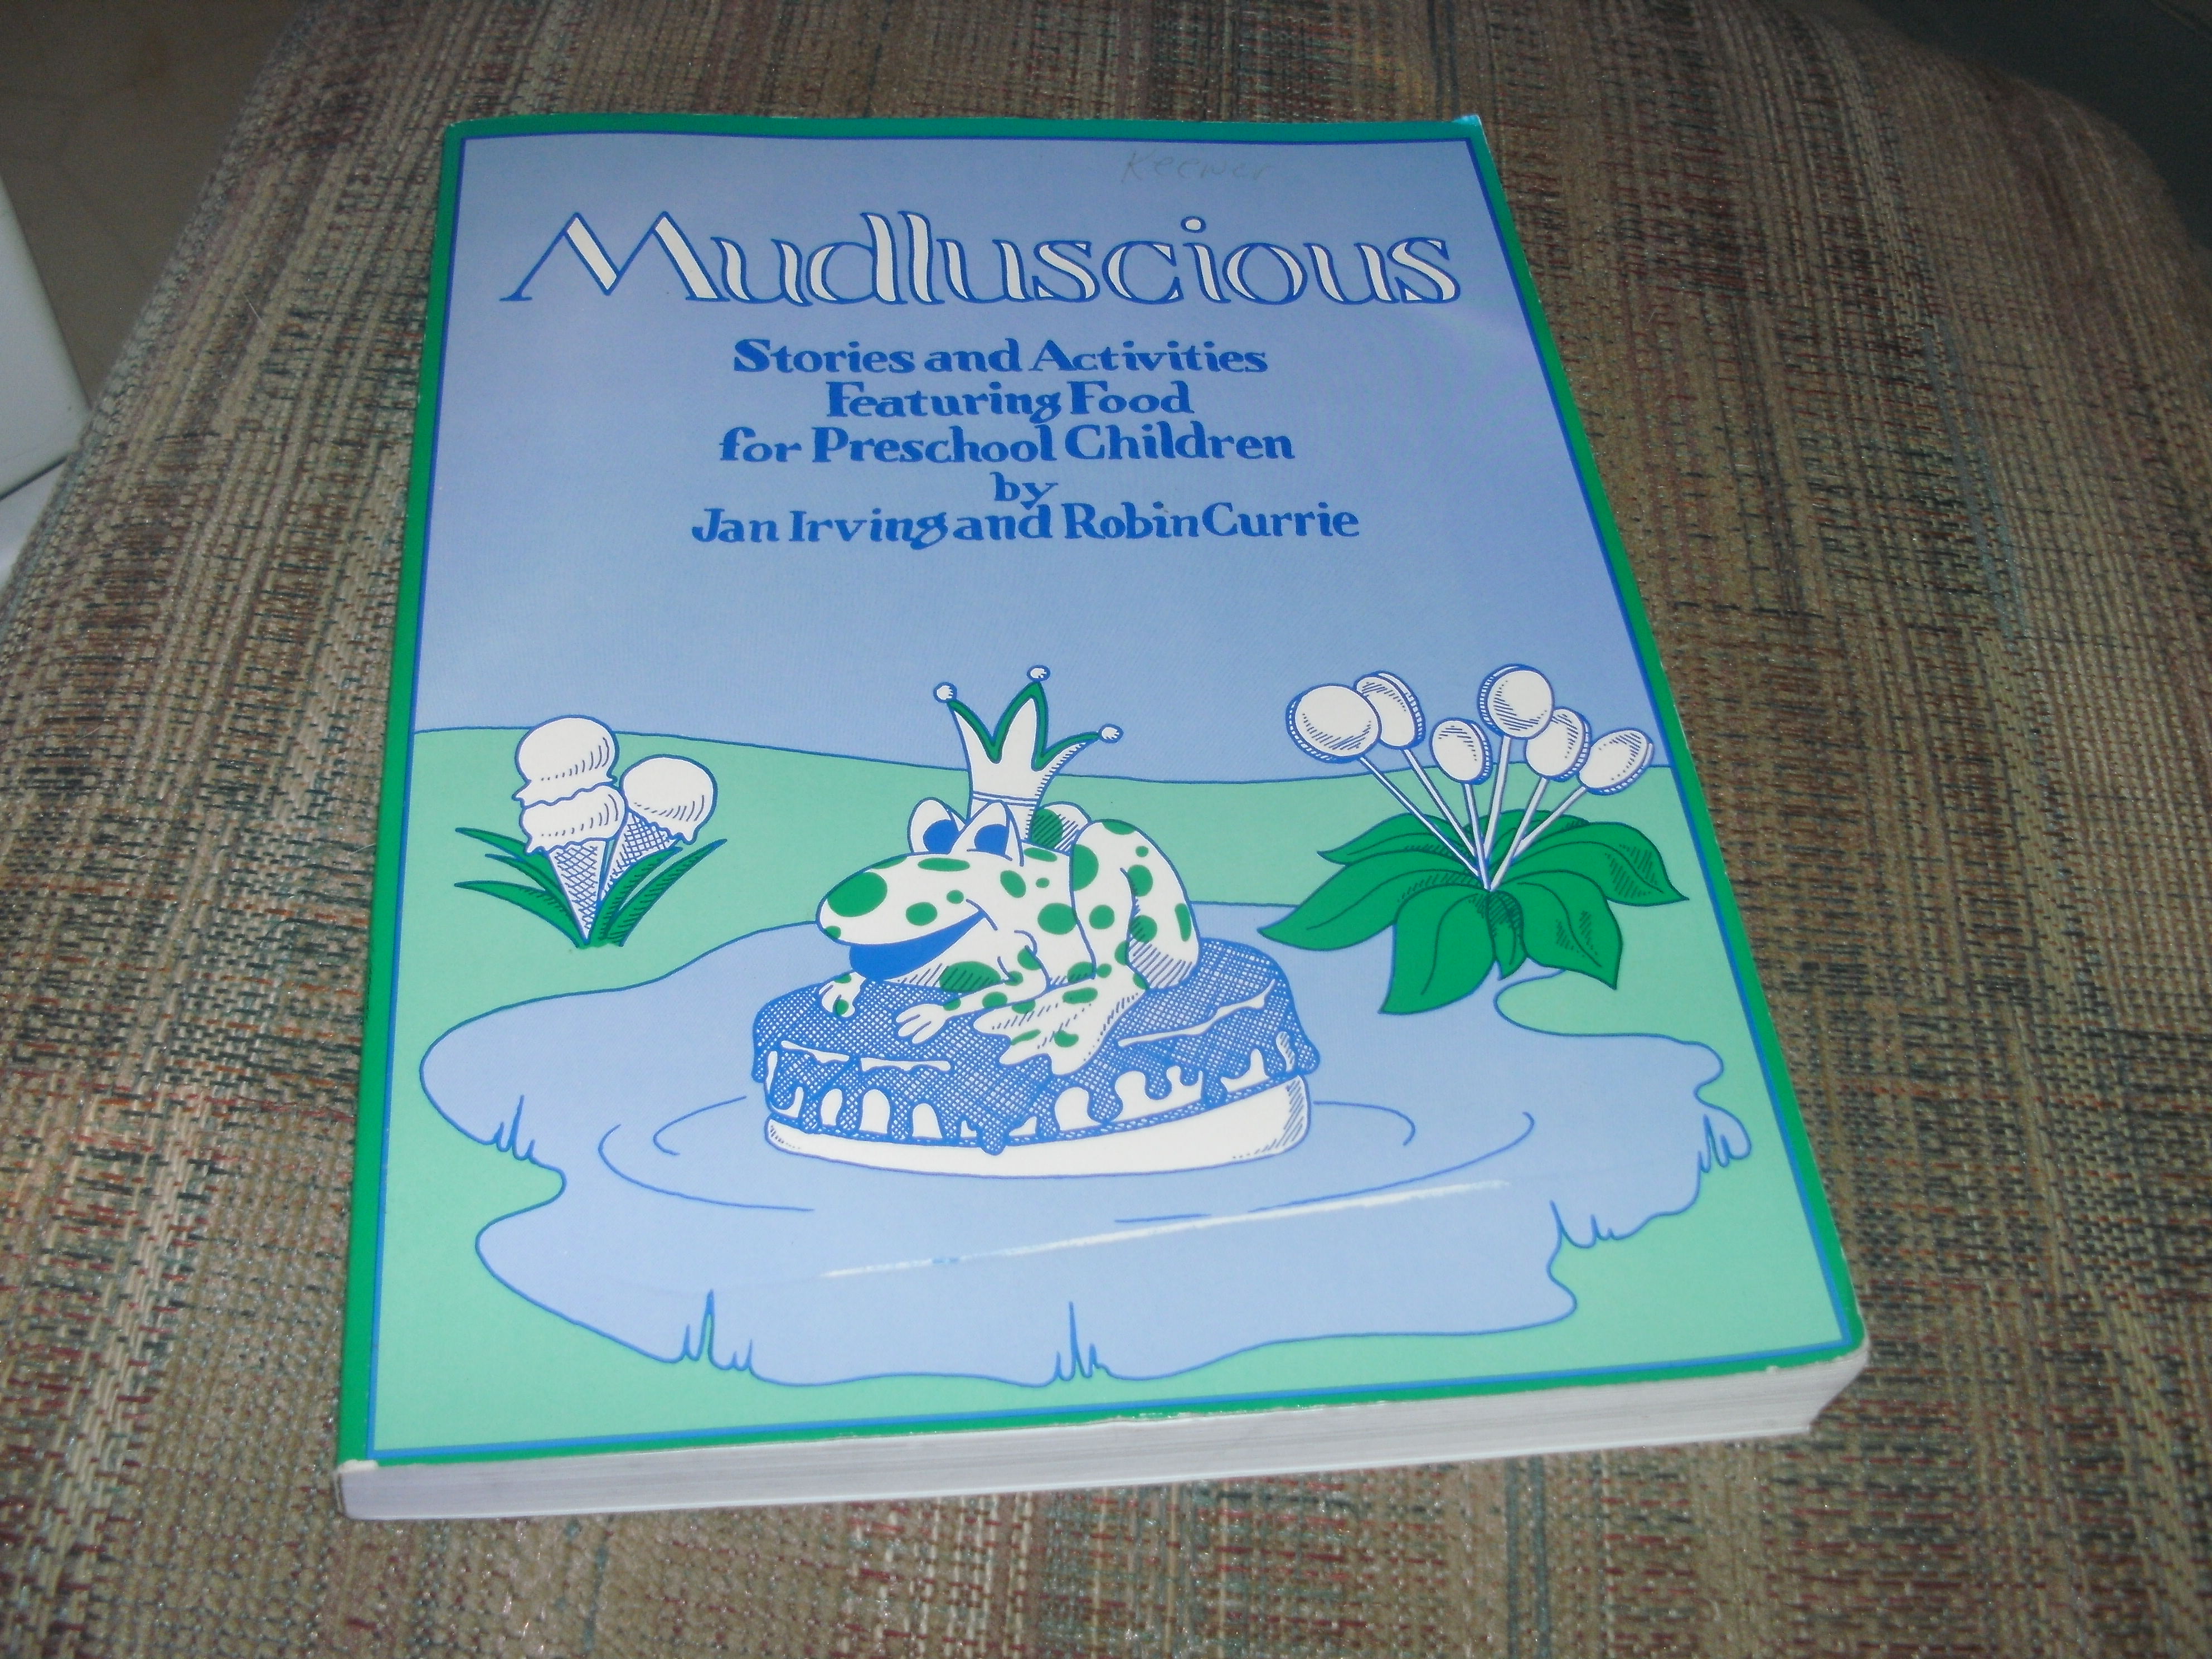 Mudluscious Stories and Activities for Preschool Children Featuring Food